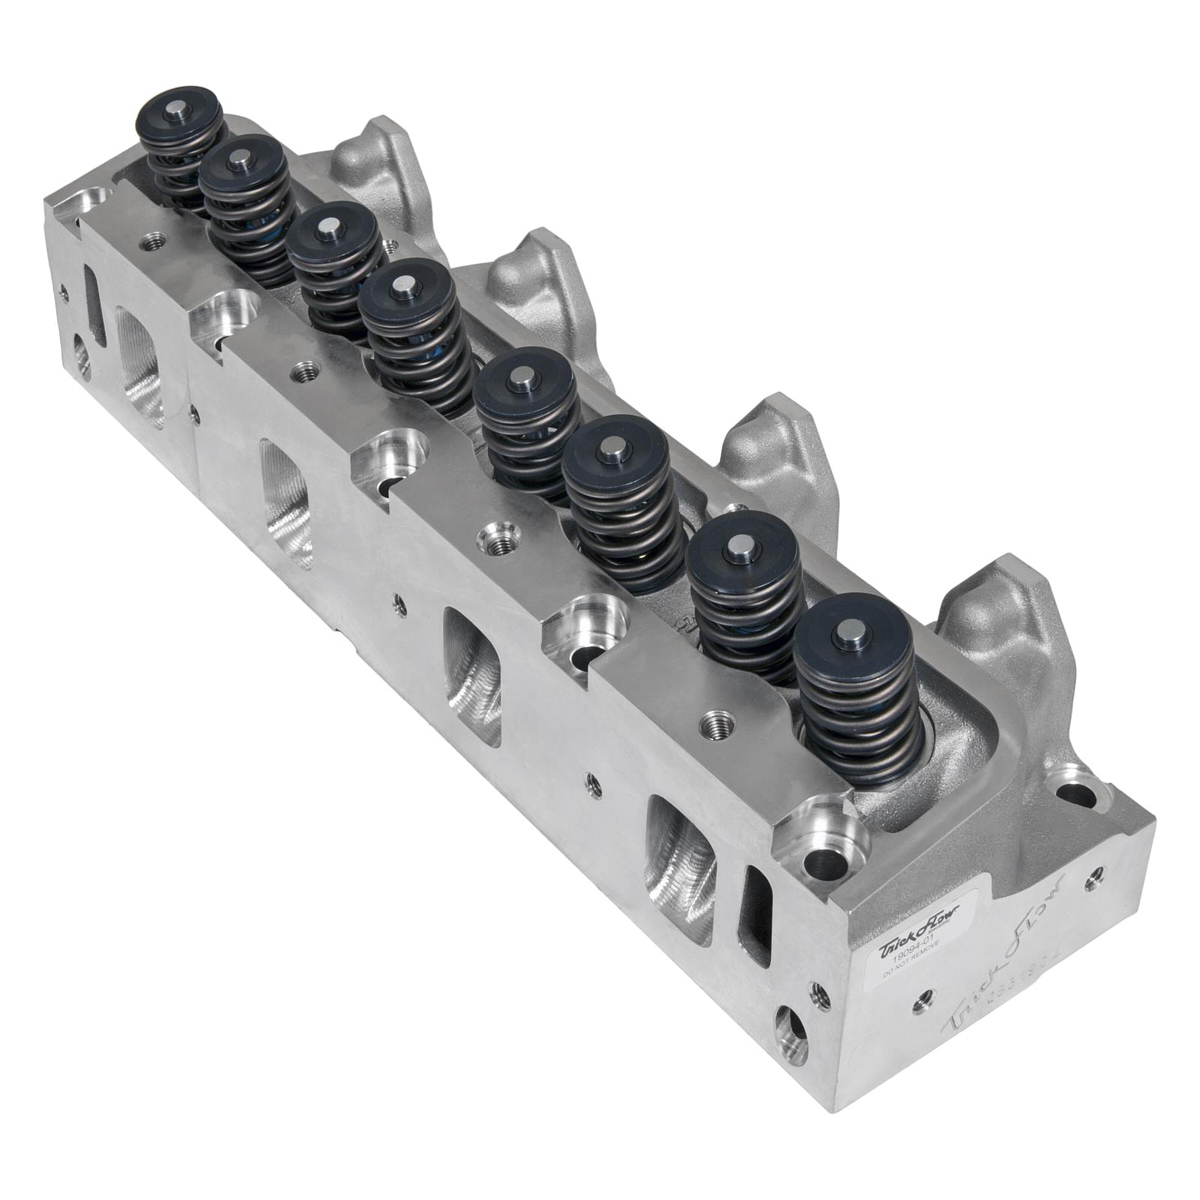 Trick Flow TFS-56417001-C00 Cylinder Head, Power Port, Assembled, 2.190 / 1.625 in Valves, 175 cc Intake, 70 cc Chamber, 1.460 in Springs, Aluminum, Ford FE-Series, Each